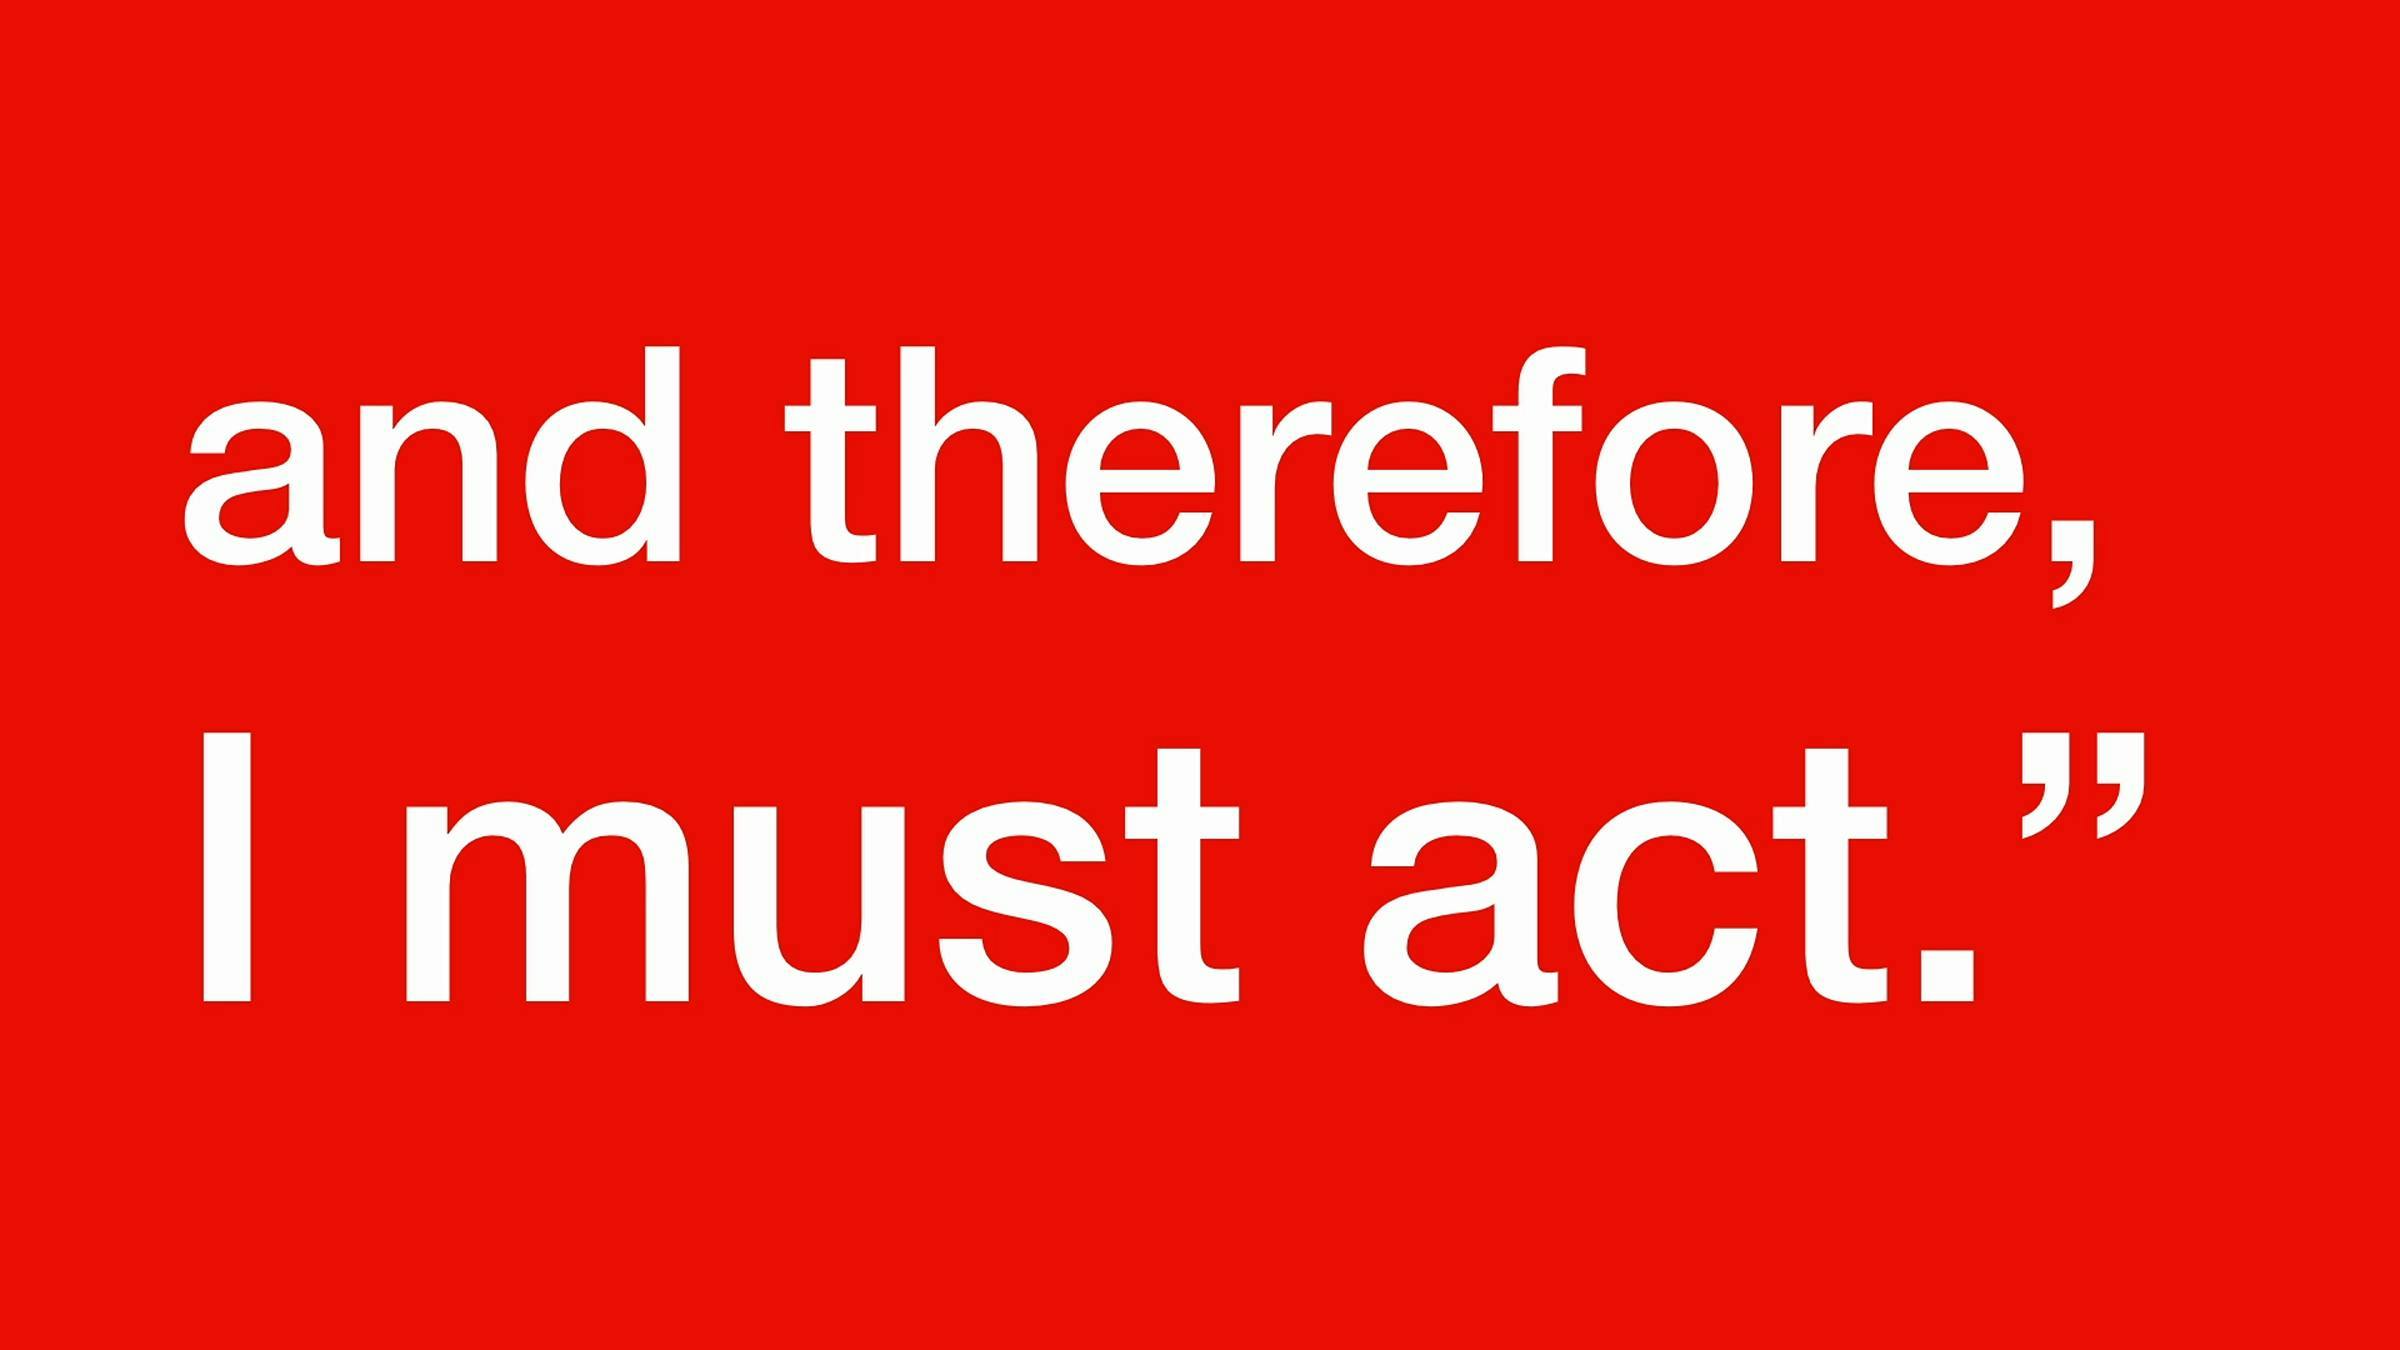 The words 'and therefore, I must act."' in white on a red background